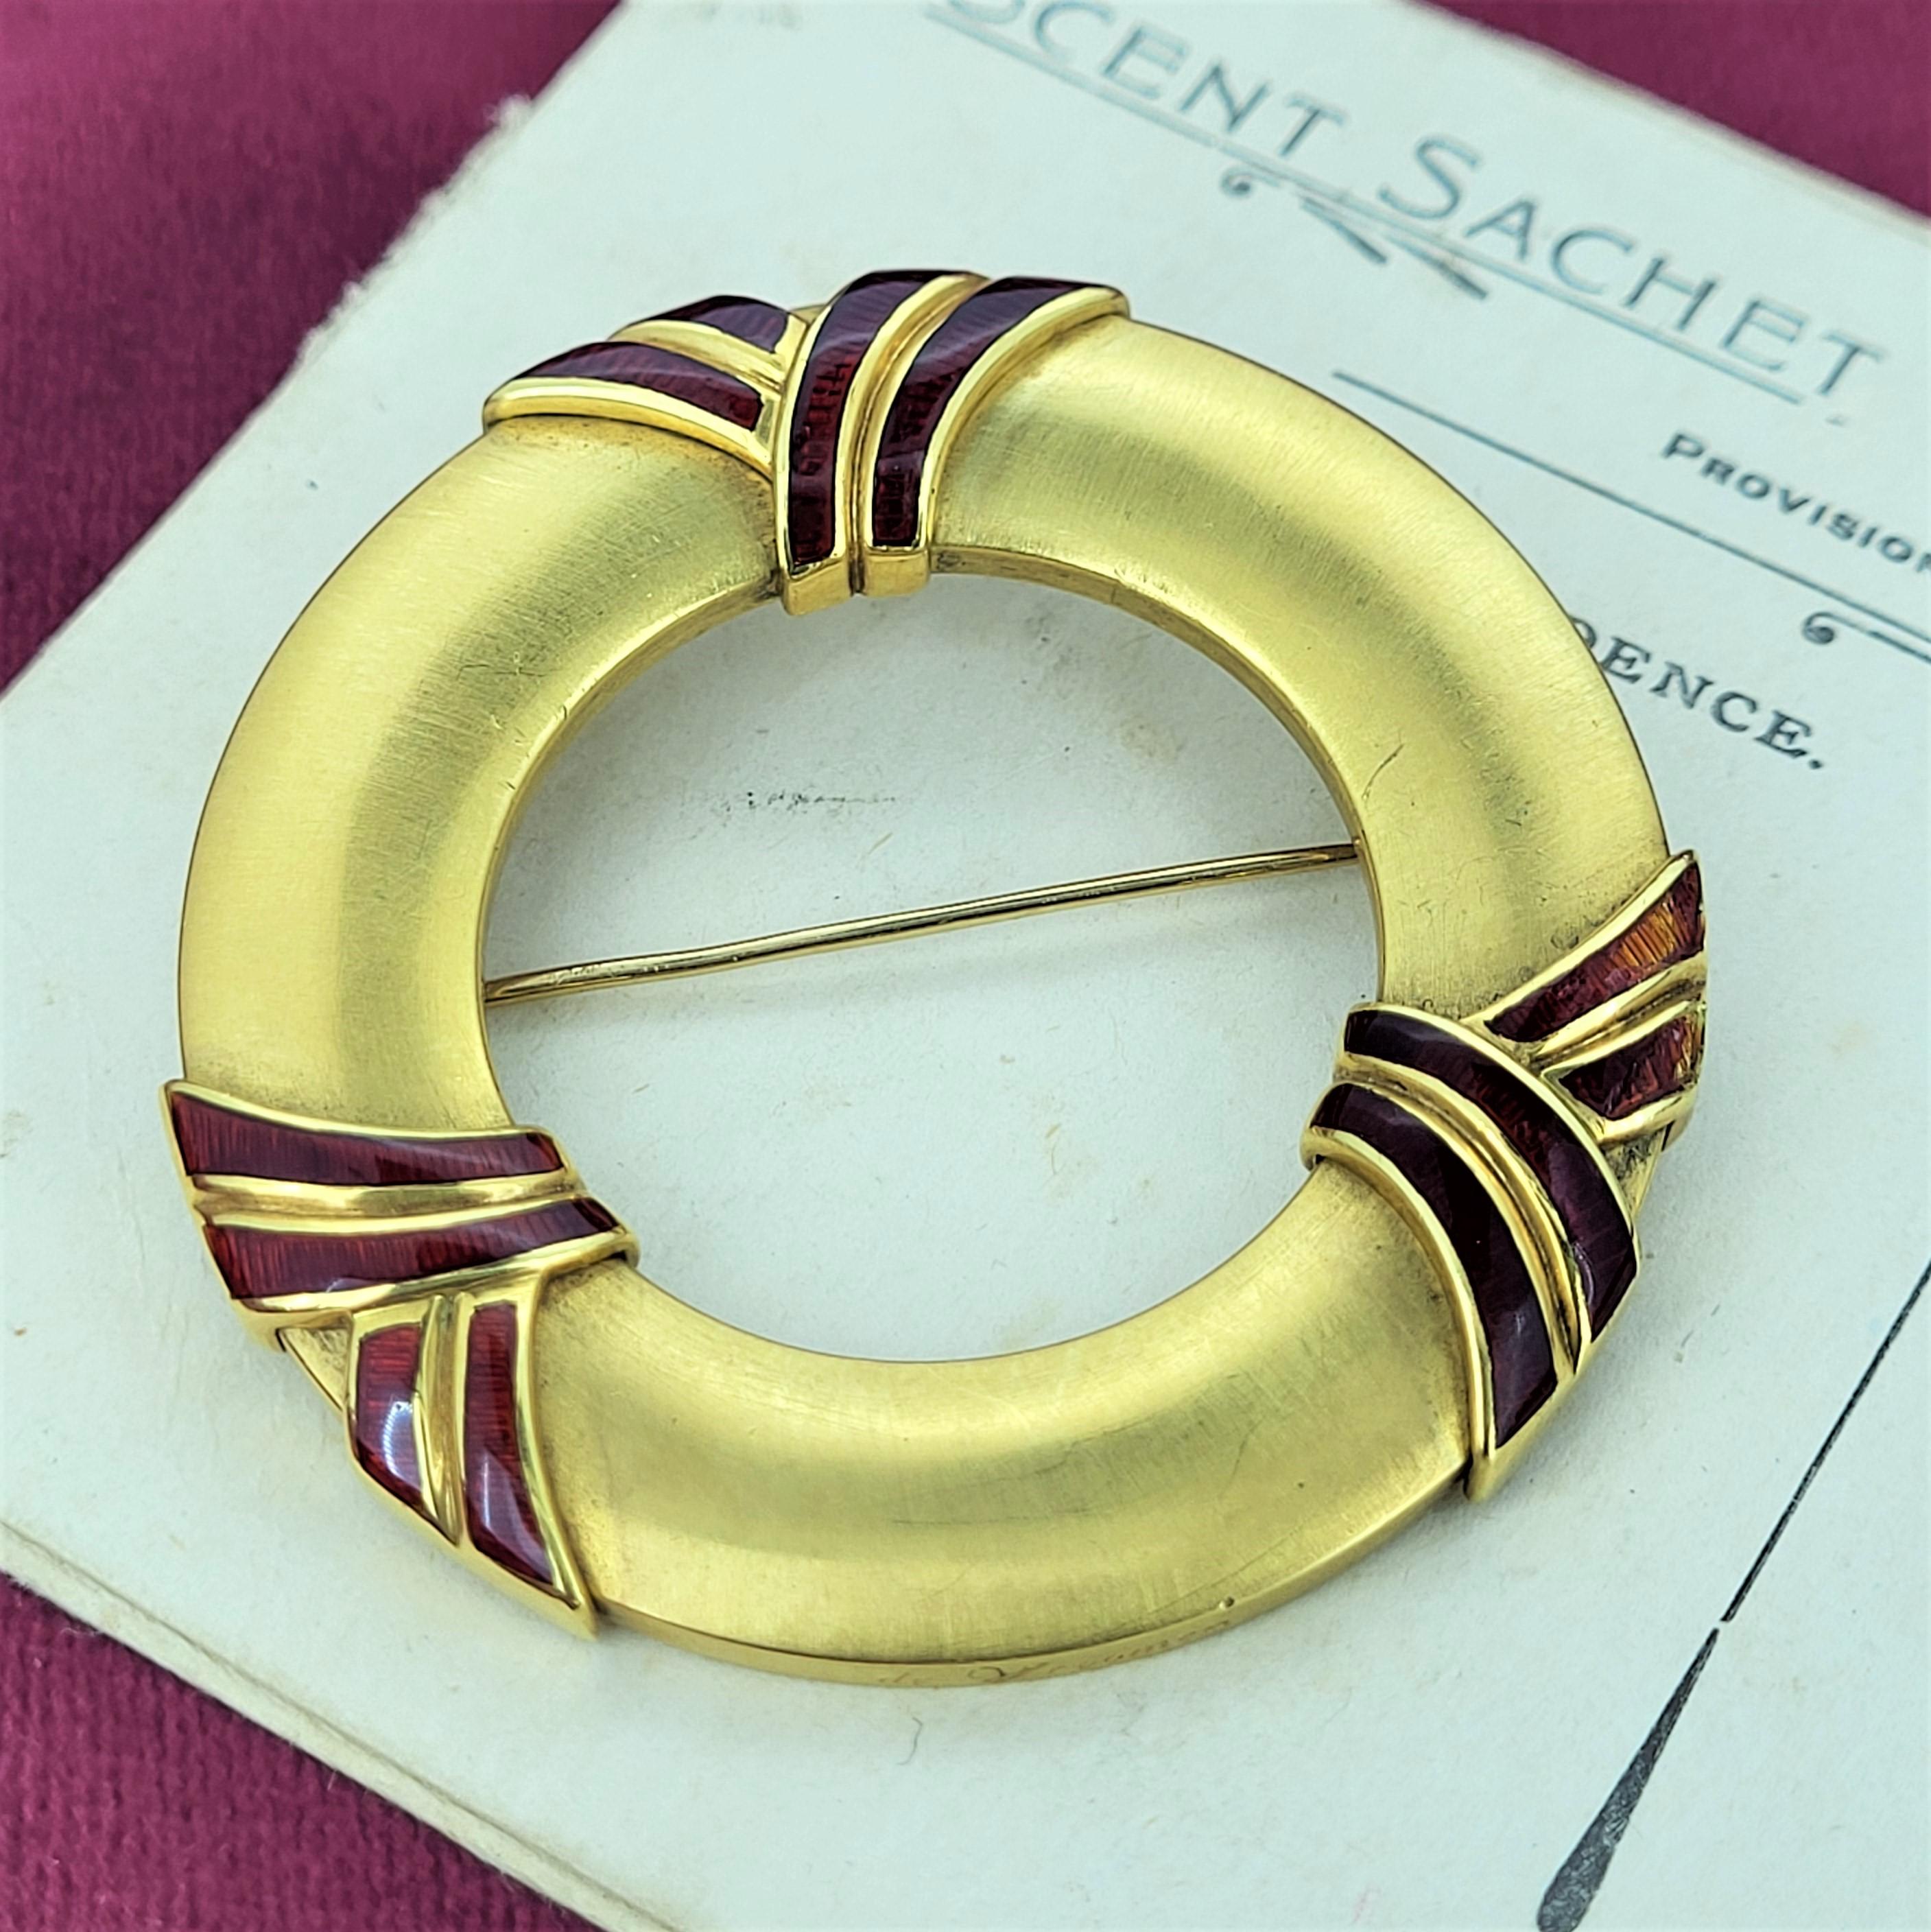 Winners of two Diamonds International Accolades was Leo De Vroomen and here we present one of the De Vroomen brooches. No longer operational a De Vroomen piece is a rare find and this brooch is a beautiful example. Crafted from 18ct gold and a deep